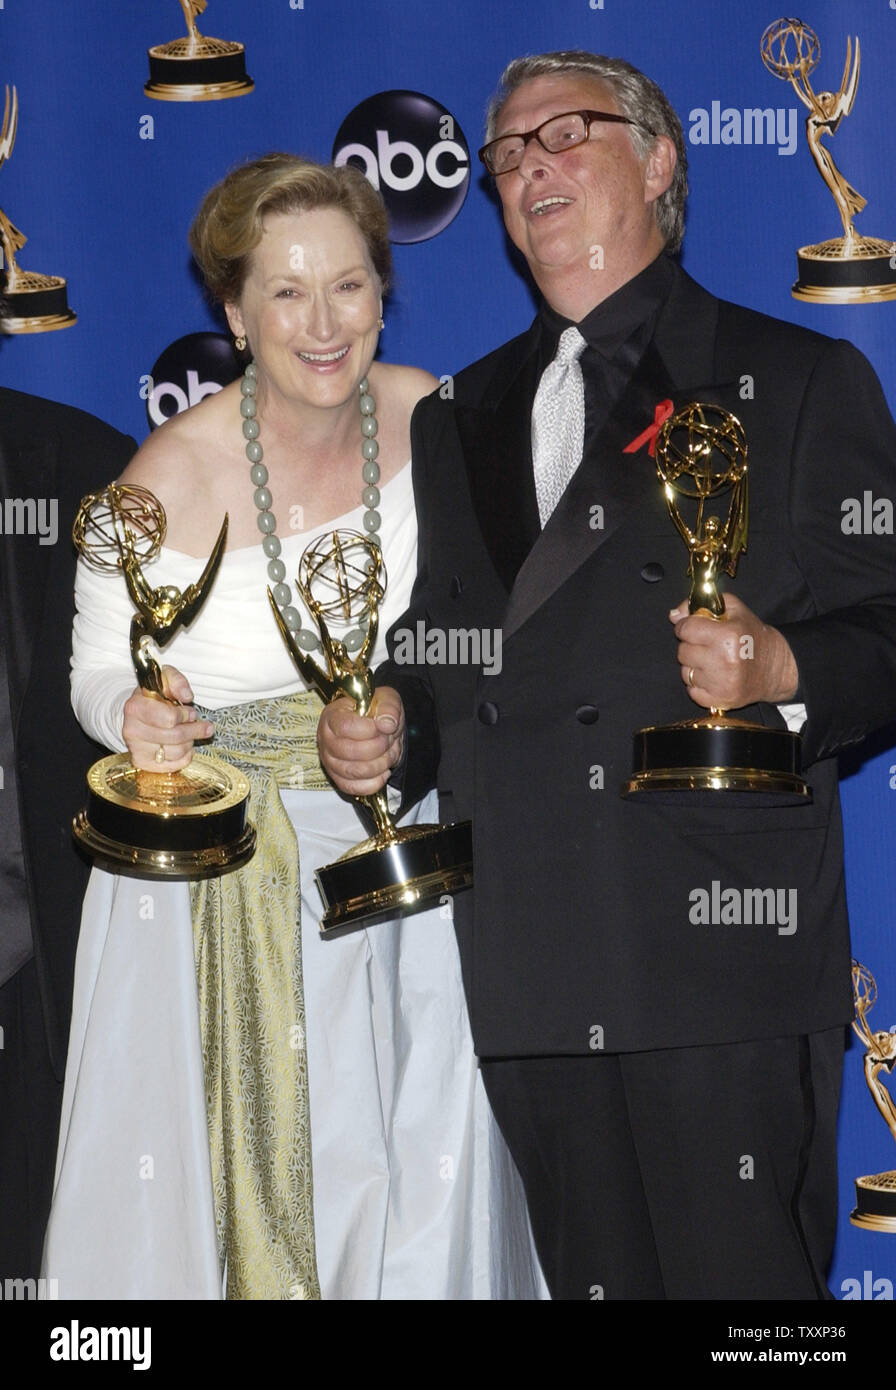 Meryl Streep shares a laugh with director Mike Nichols (R) they pose with her trophies backstage during the 56th Annual Primetime Emmy Awards, Sunday, September 19, 2004 at the Shrine Auditorium in Los Angeles, California. 'Angels in America,' the adaptation of Tony Kushner's Pulitzer Prize-winning play about Americans facing AIDS in the 1980's, was honored as outstanding miniseries and won acting trophies for Al pacino, Meryl Streep, Mary-Louise Parker and Jeffrey Wright. Kusher received a best writing award and Mike Nichols won for best director. (UPI Photo/Jim Ruymen) Stock Photo